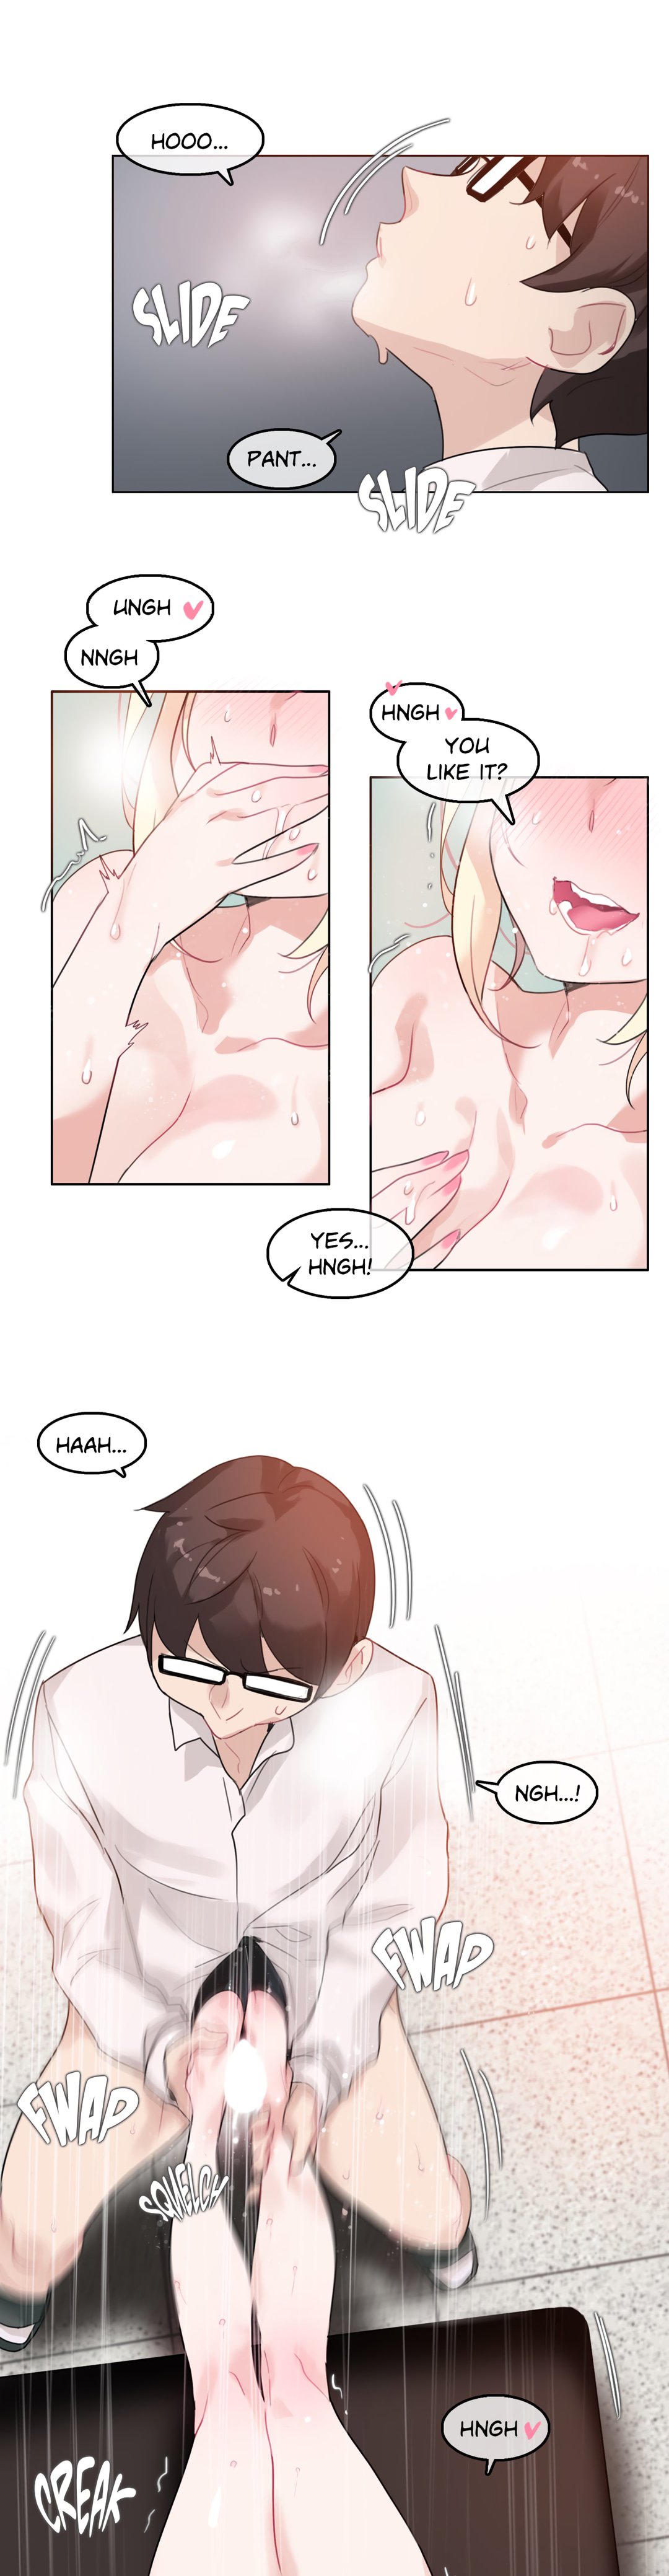 A Pervert's Daily Life - 33 page 7